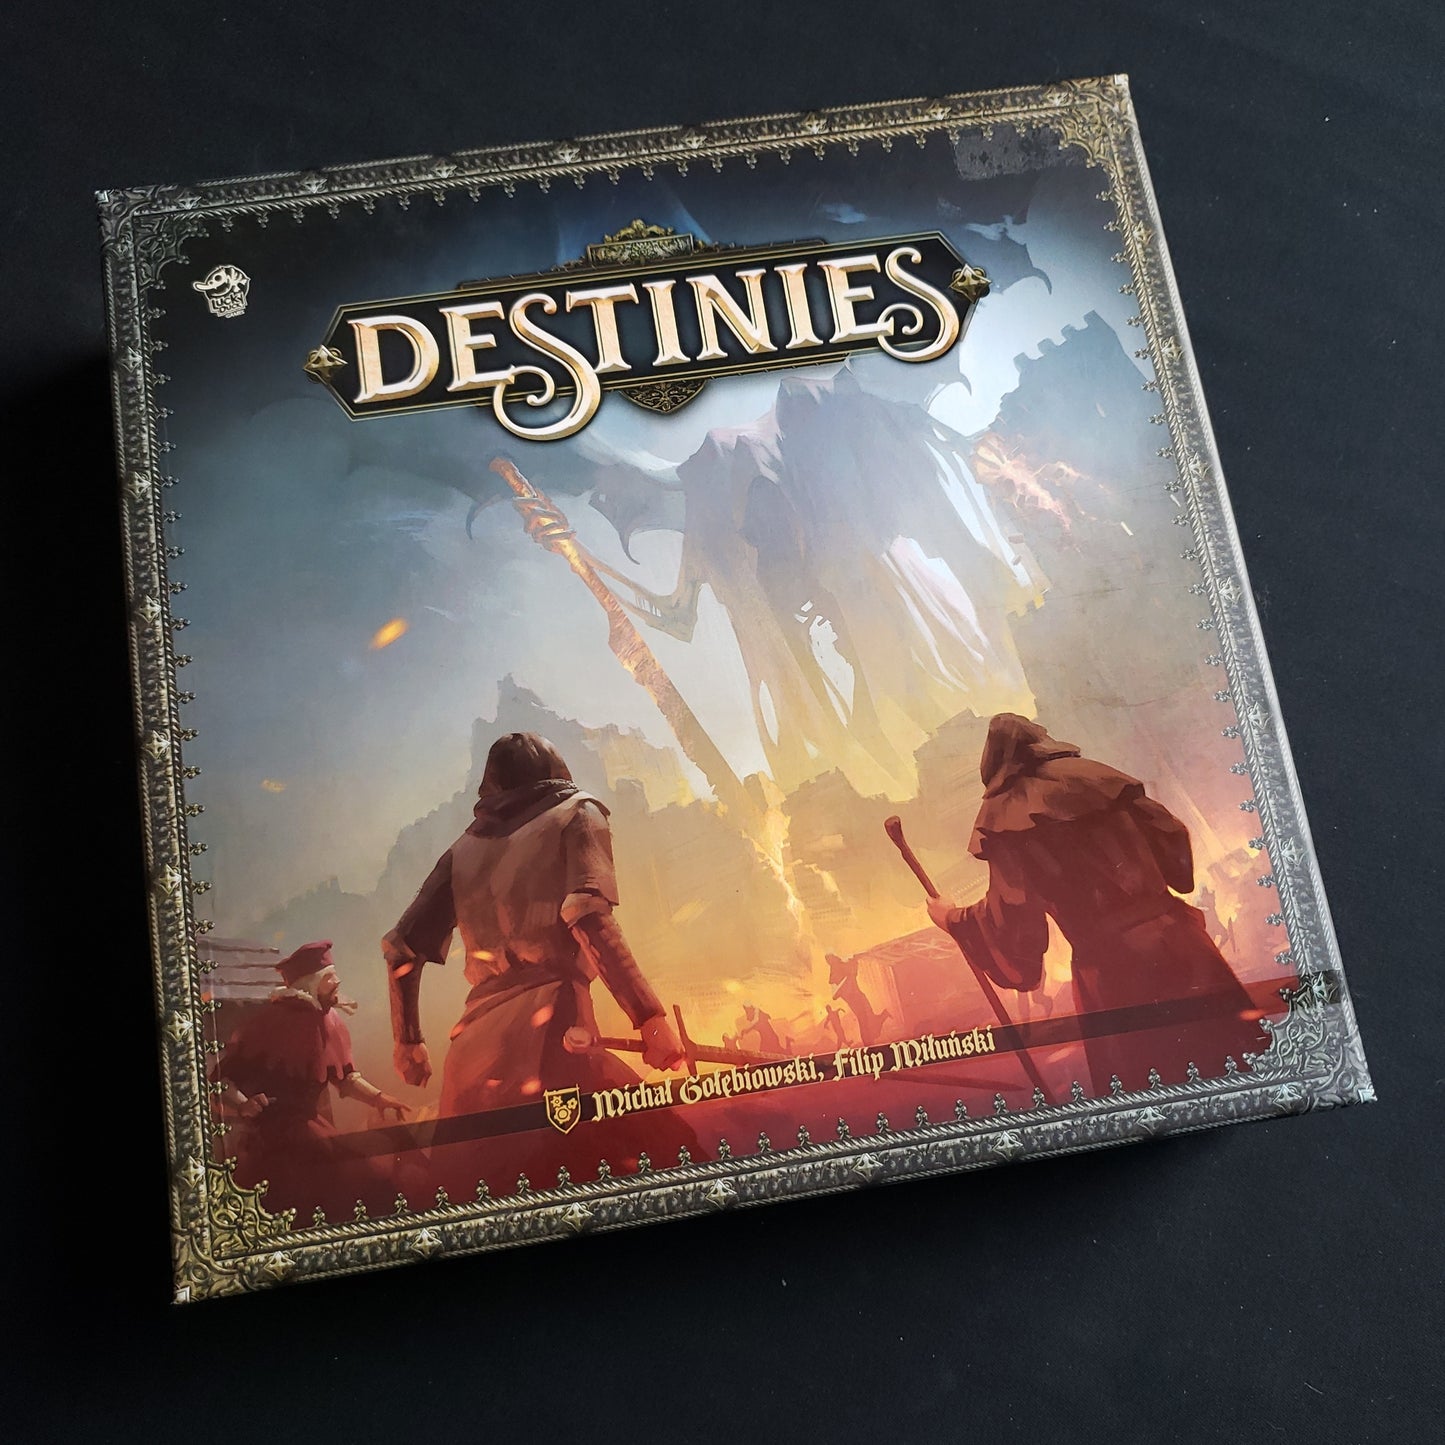 Image shows the front cover of the box of the Destinies board game